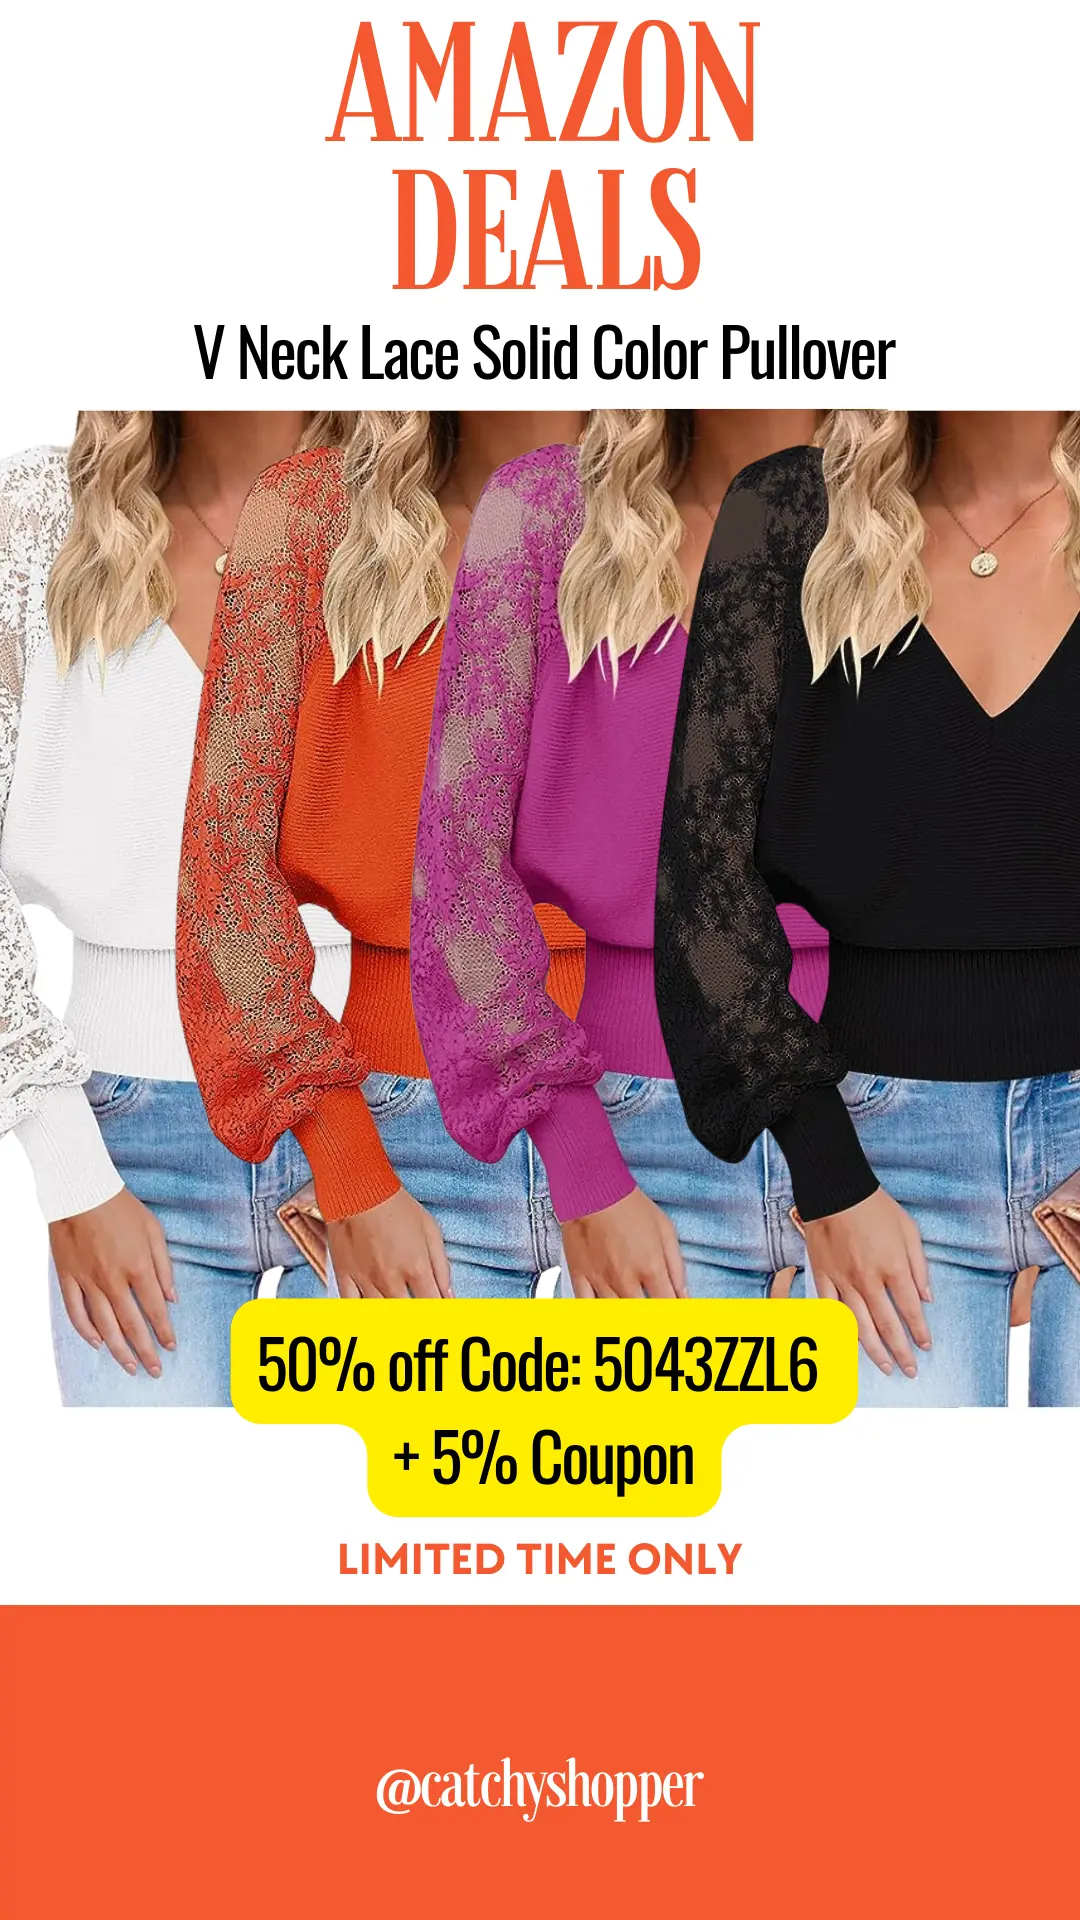 V Neck Lace Solid Color Pullover